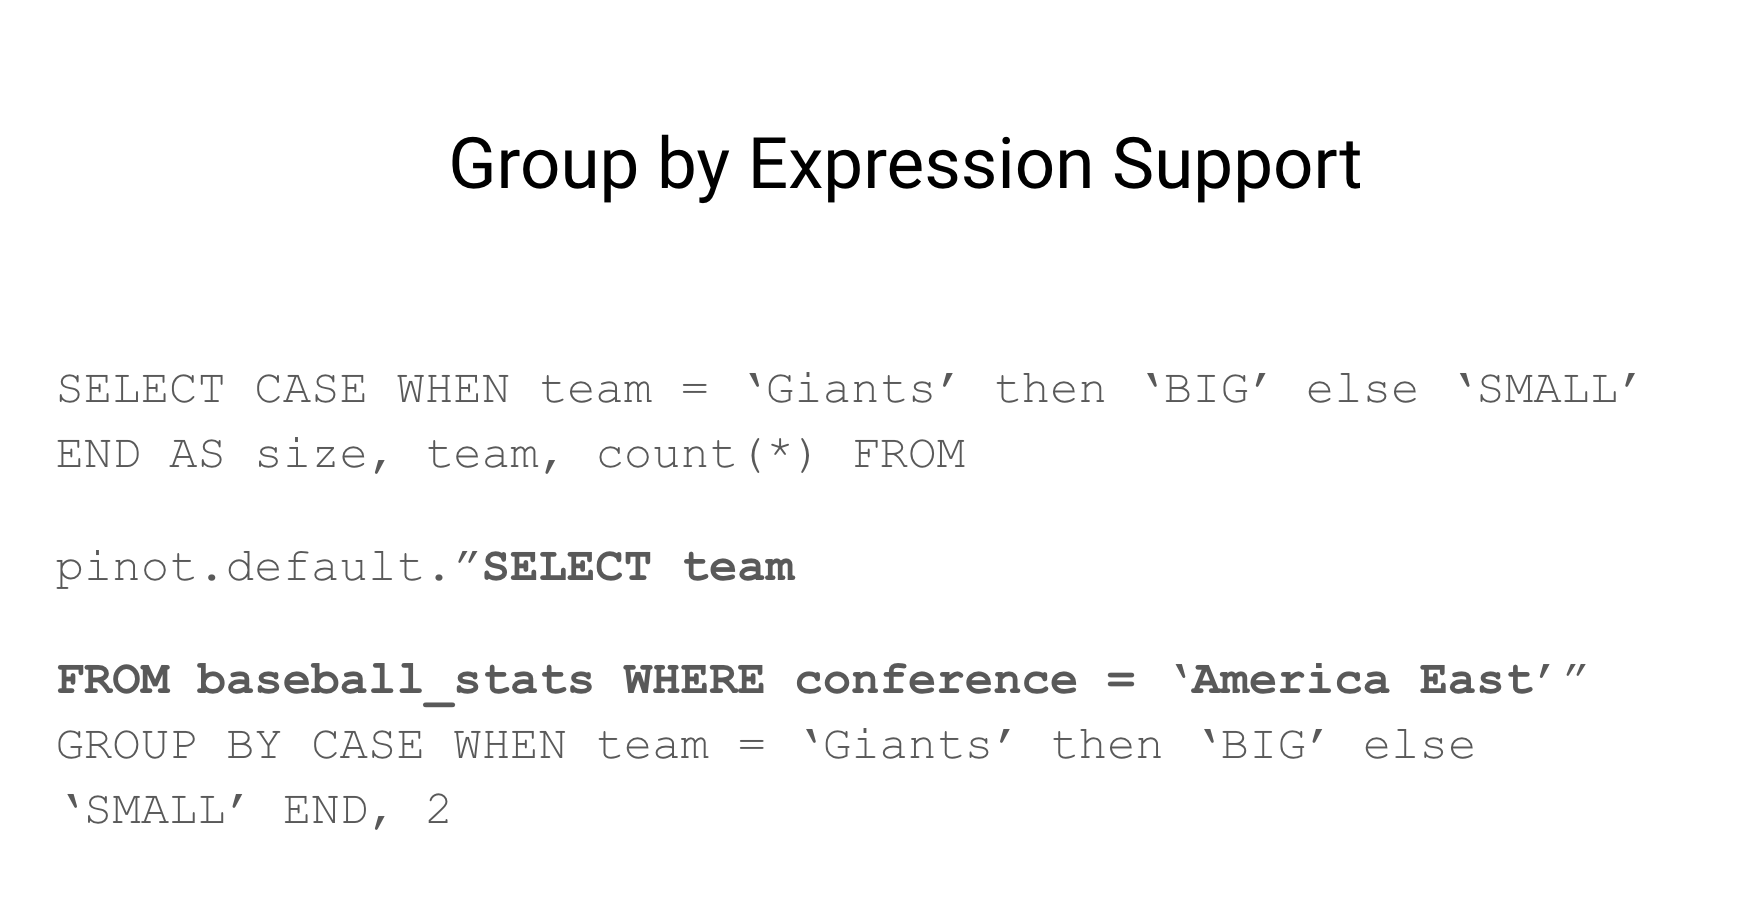 Apache Pinot group by expression support